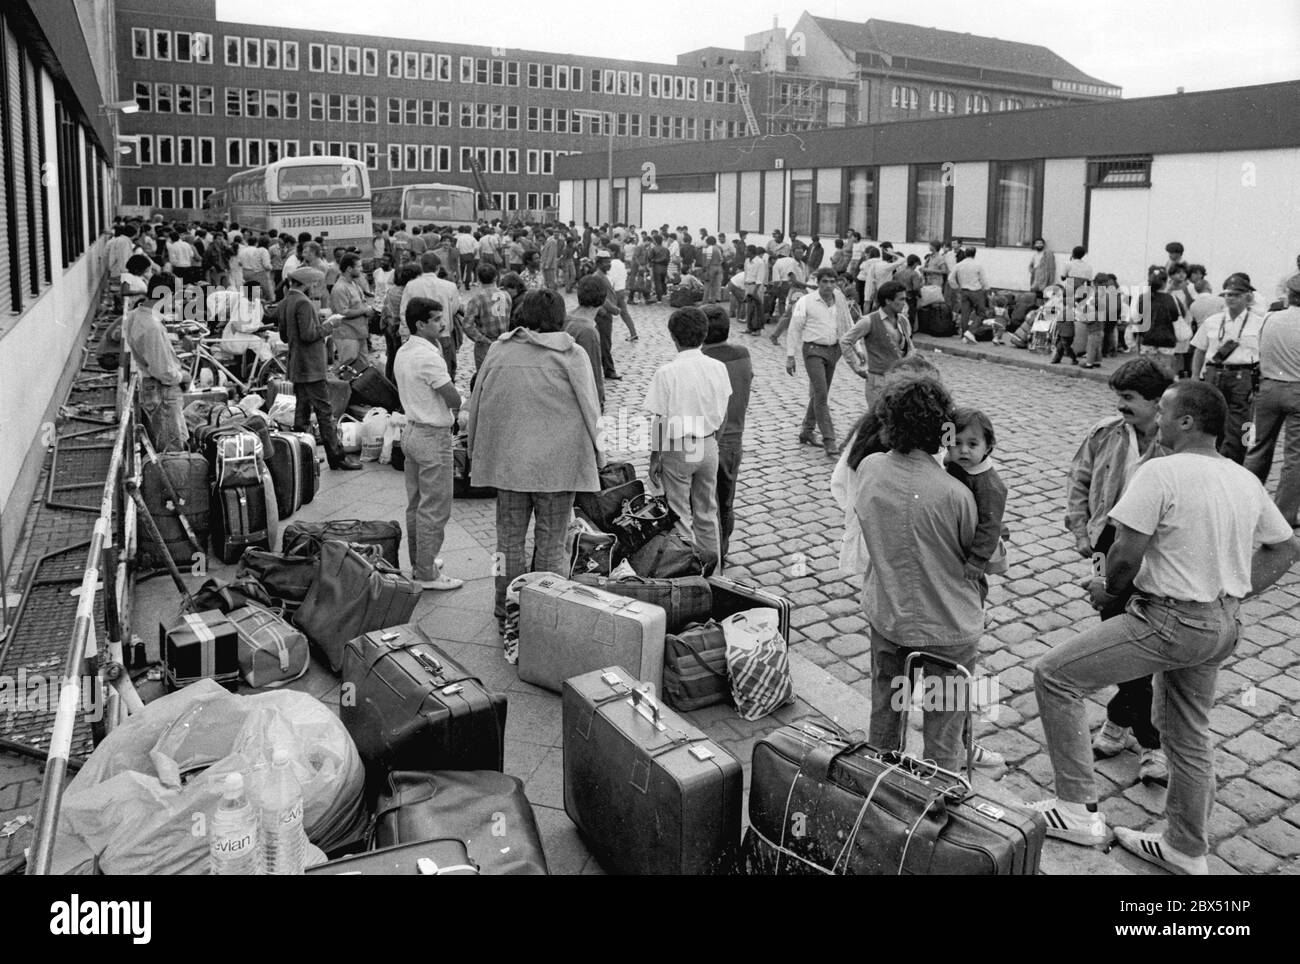 Berlin / foreigners / 8/1986 Asylum office at Friedrich-Krause-Ufer, waiting for transport to another federal state. This is to create a fair balance between the states concerned. At that time, mainly Iranians, Pakistanis, Ceylonese are seeking asylum, and of course Turks and Kurds. // Asylum / Asia /// Kurds *** Local Caption *** Asylum seekers, -Asylum Social Department-. Waiting for transportation to other states to balance bureau. They are mainly coming from Bangla Desh, Iran and Pakistan and Ceylon // Foreigners / migration / Asia / Asian [automated translation] Stock Photo